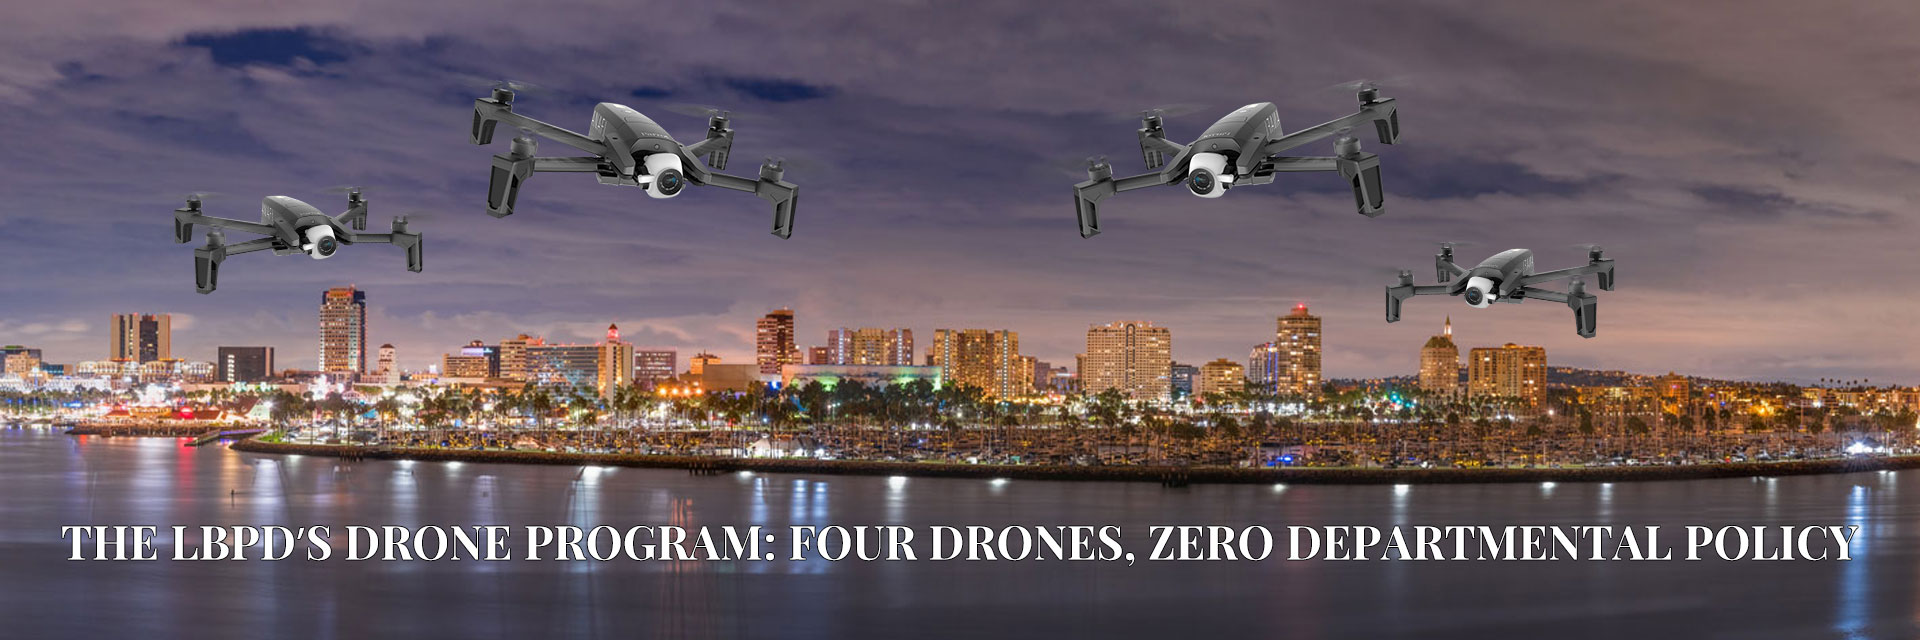 The_LBPDs_Drone_Program-Four_Drones_With_Zero_Departmental_Policy